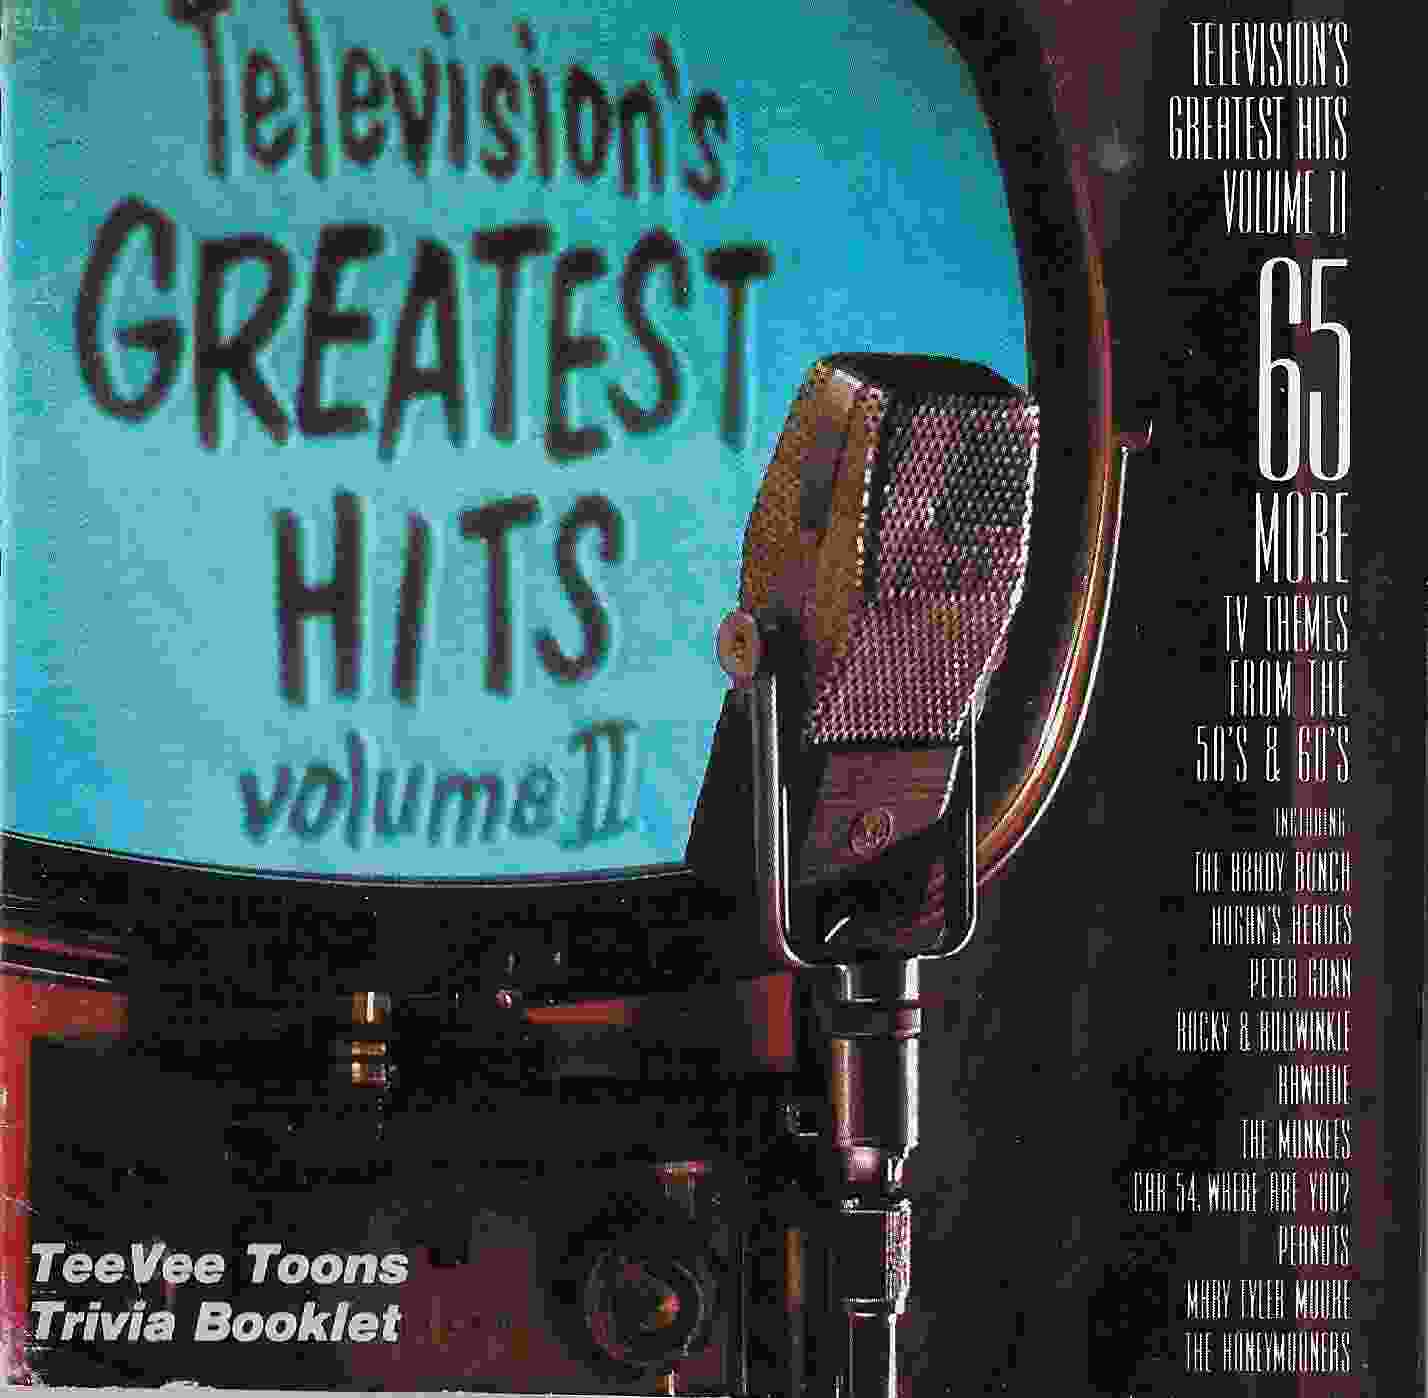 Picture of TVT 1200 CD Television's greatest hits - Volume 2 by artist Various from ITV, Channel 4 and Channel 5 cds library